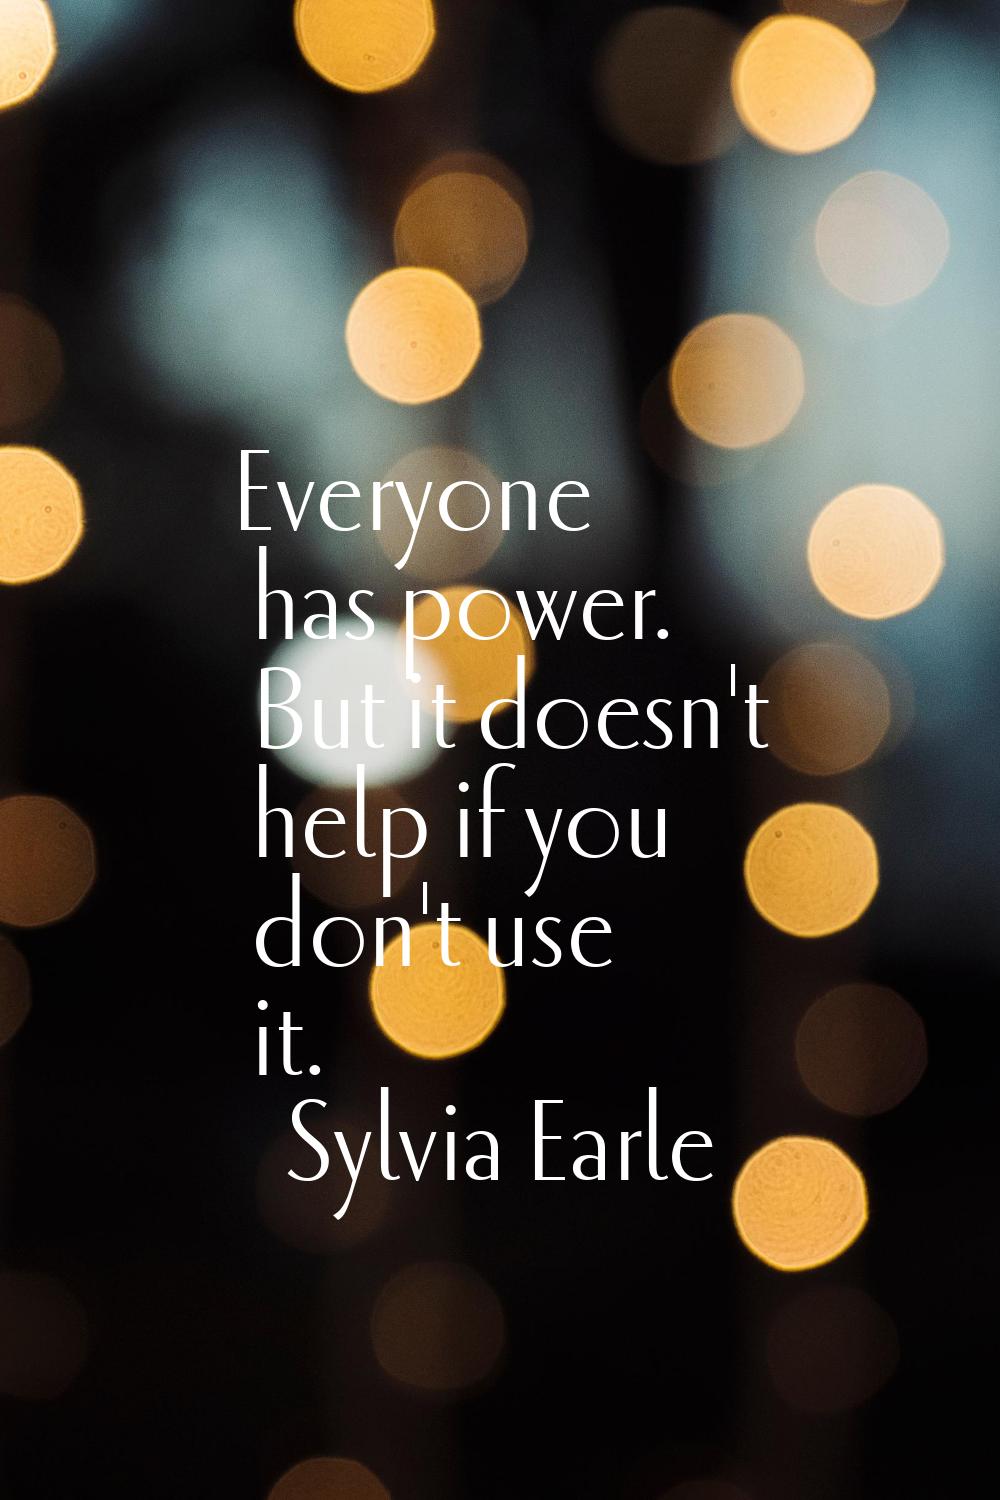 Everyone has power. But it doesn't help if you don't use it.